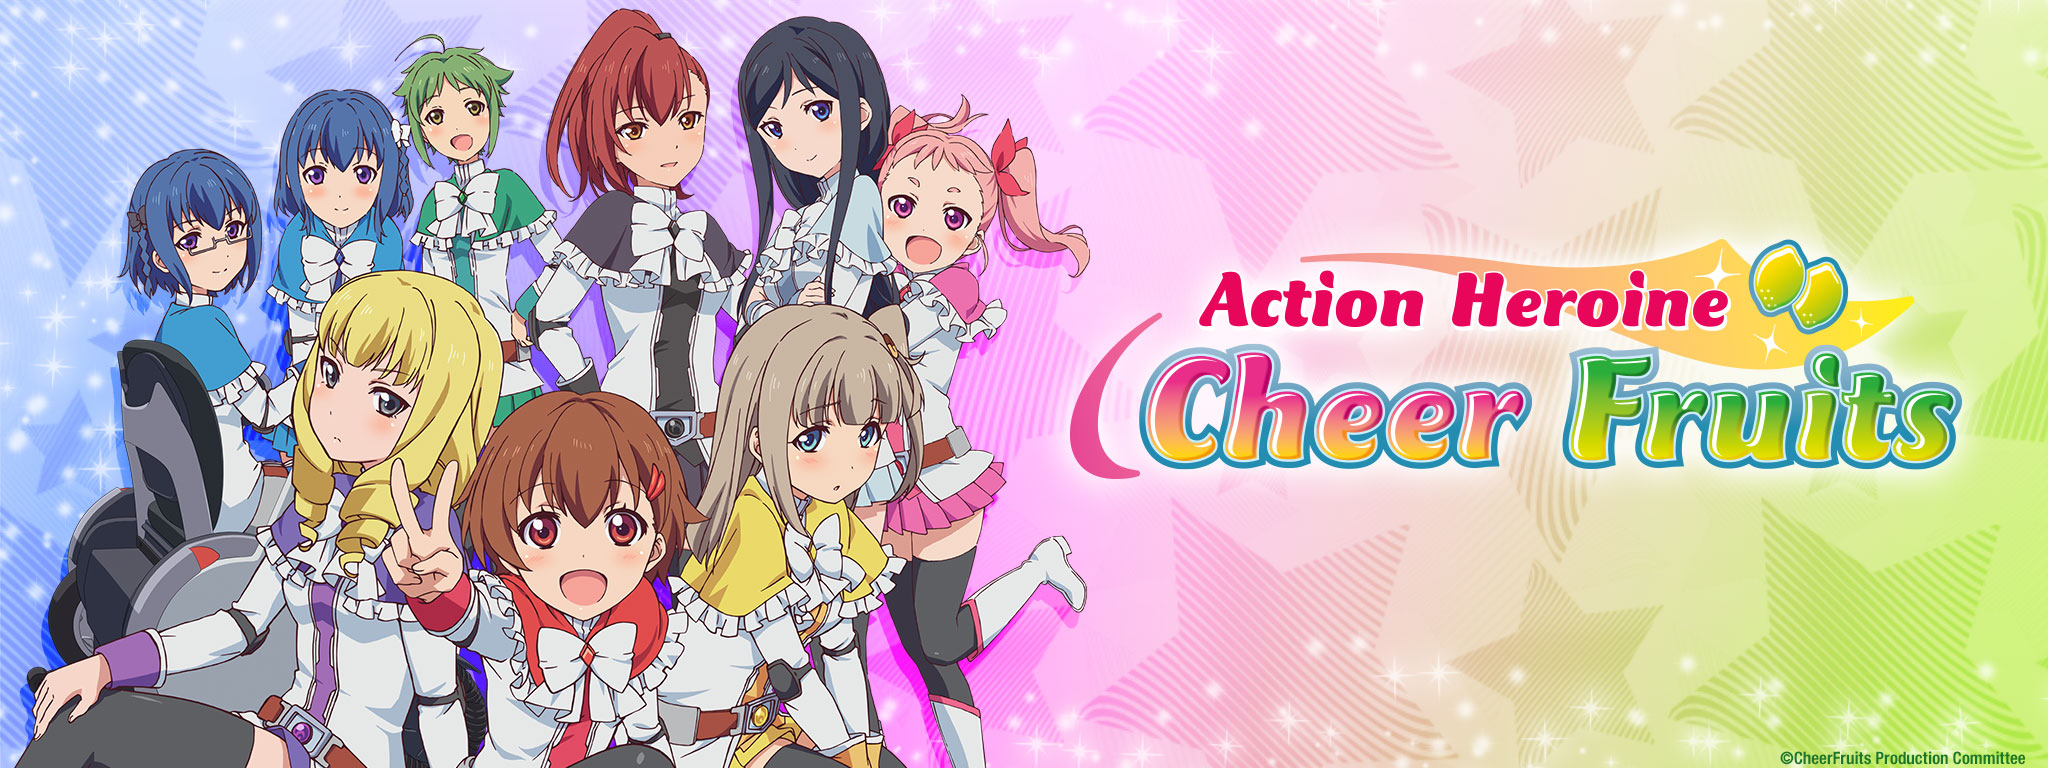 Title Art for Action Heroine Cheer Fruits